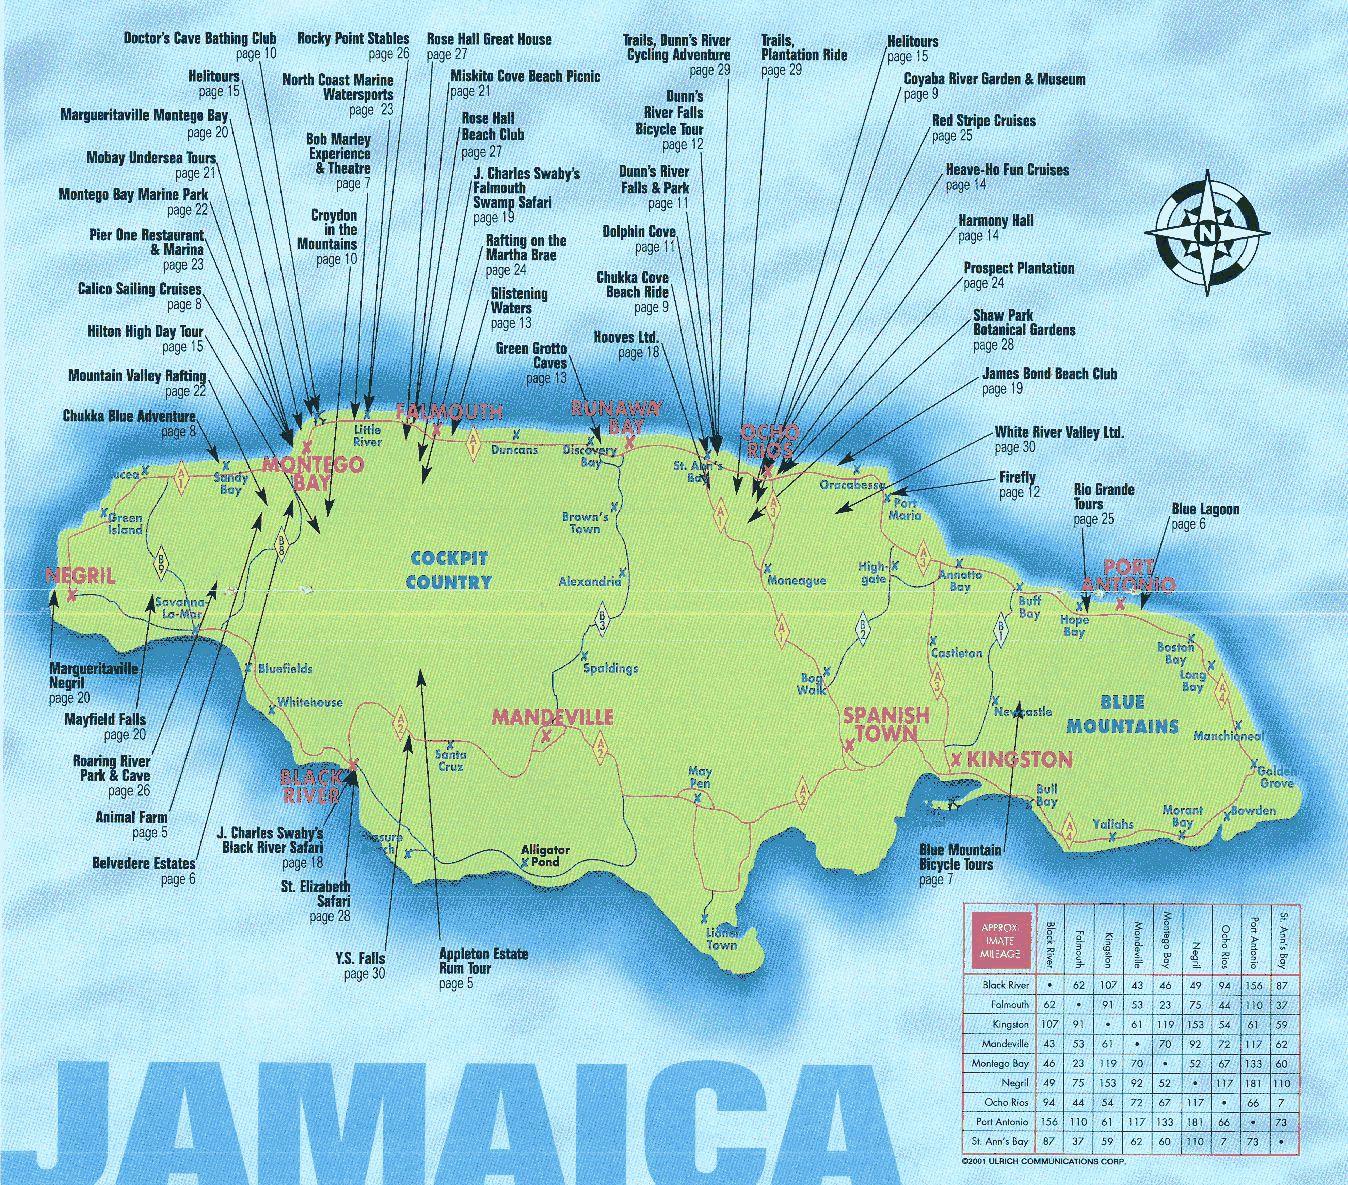 Jamaica tourist attractions map Map of jamaica showing tourist